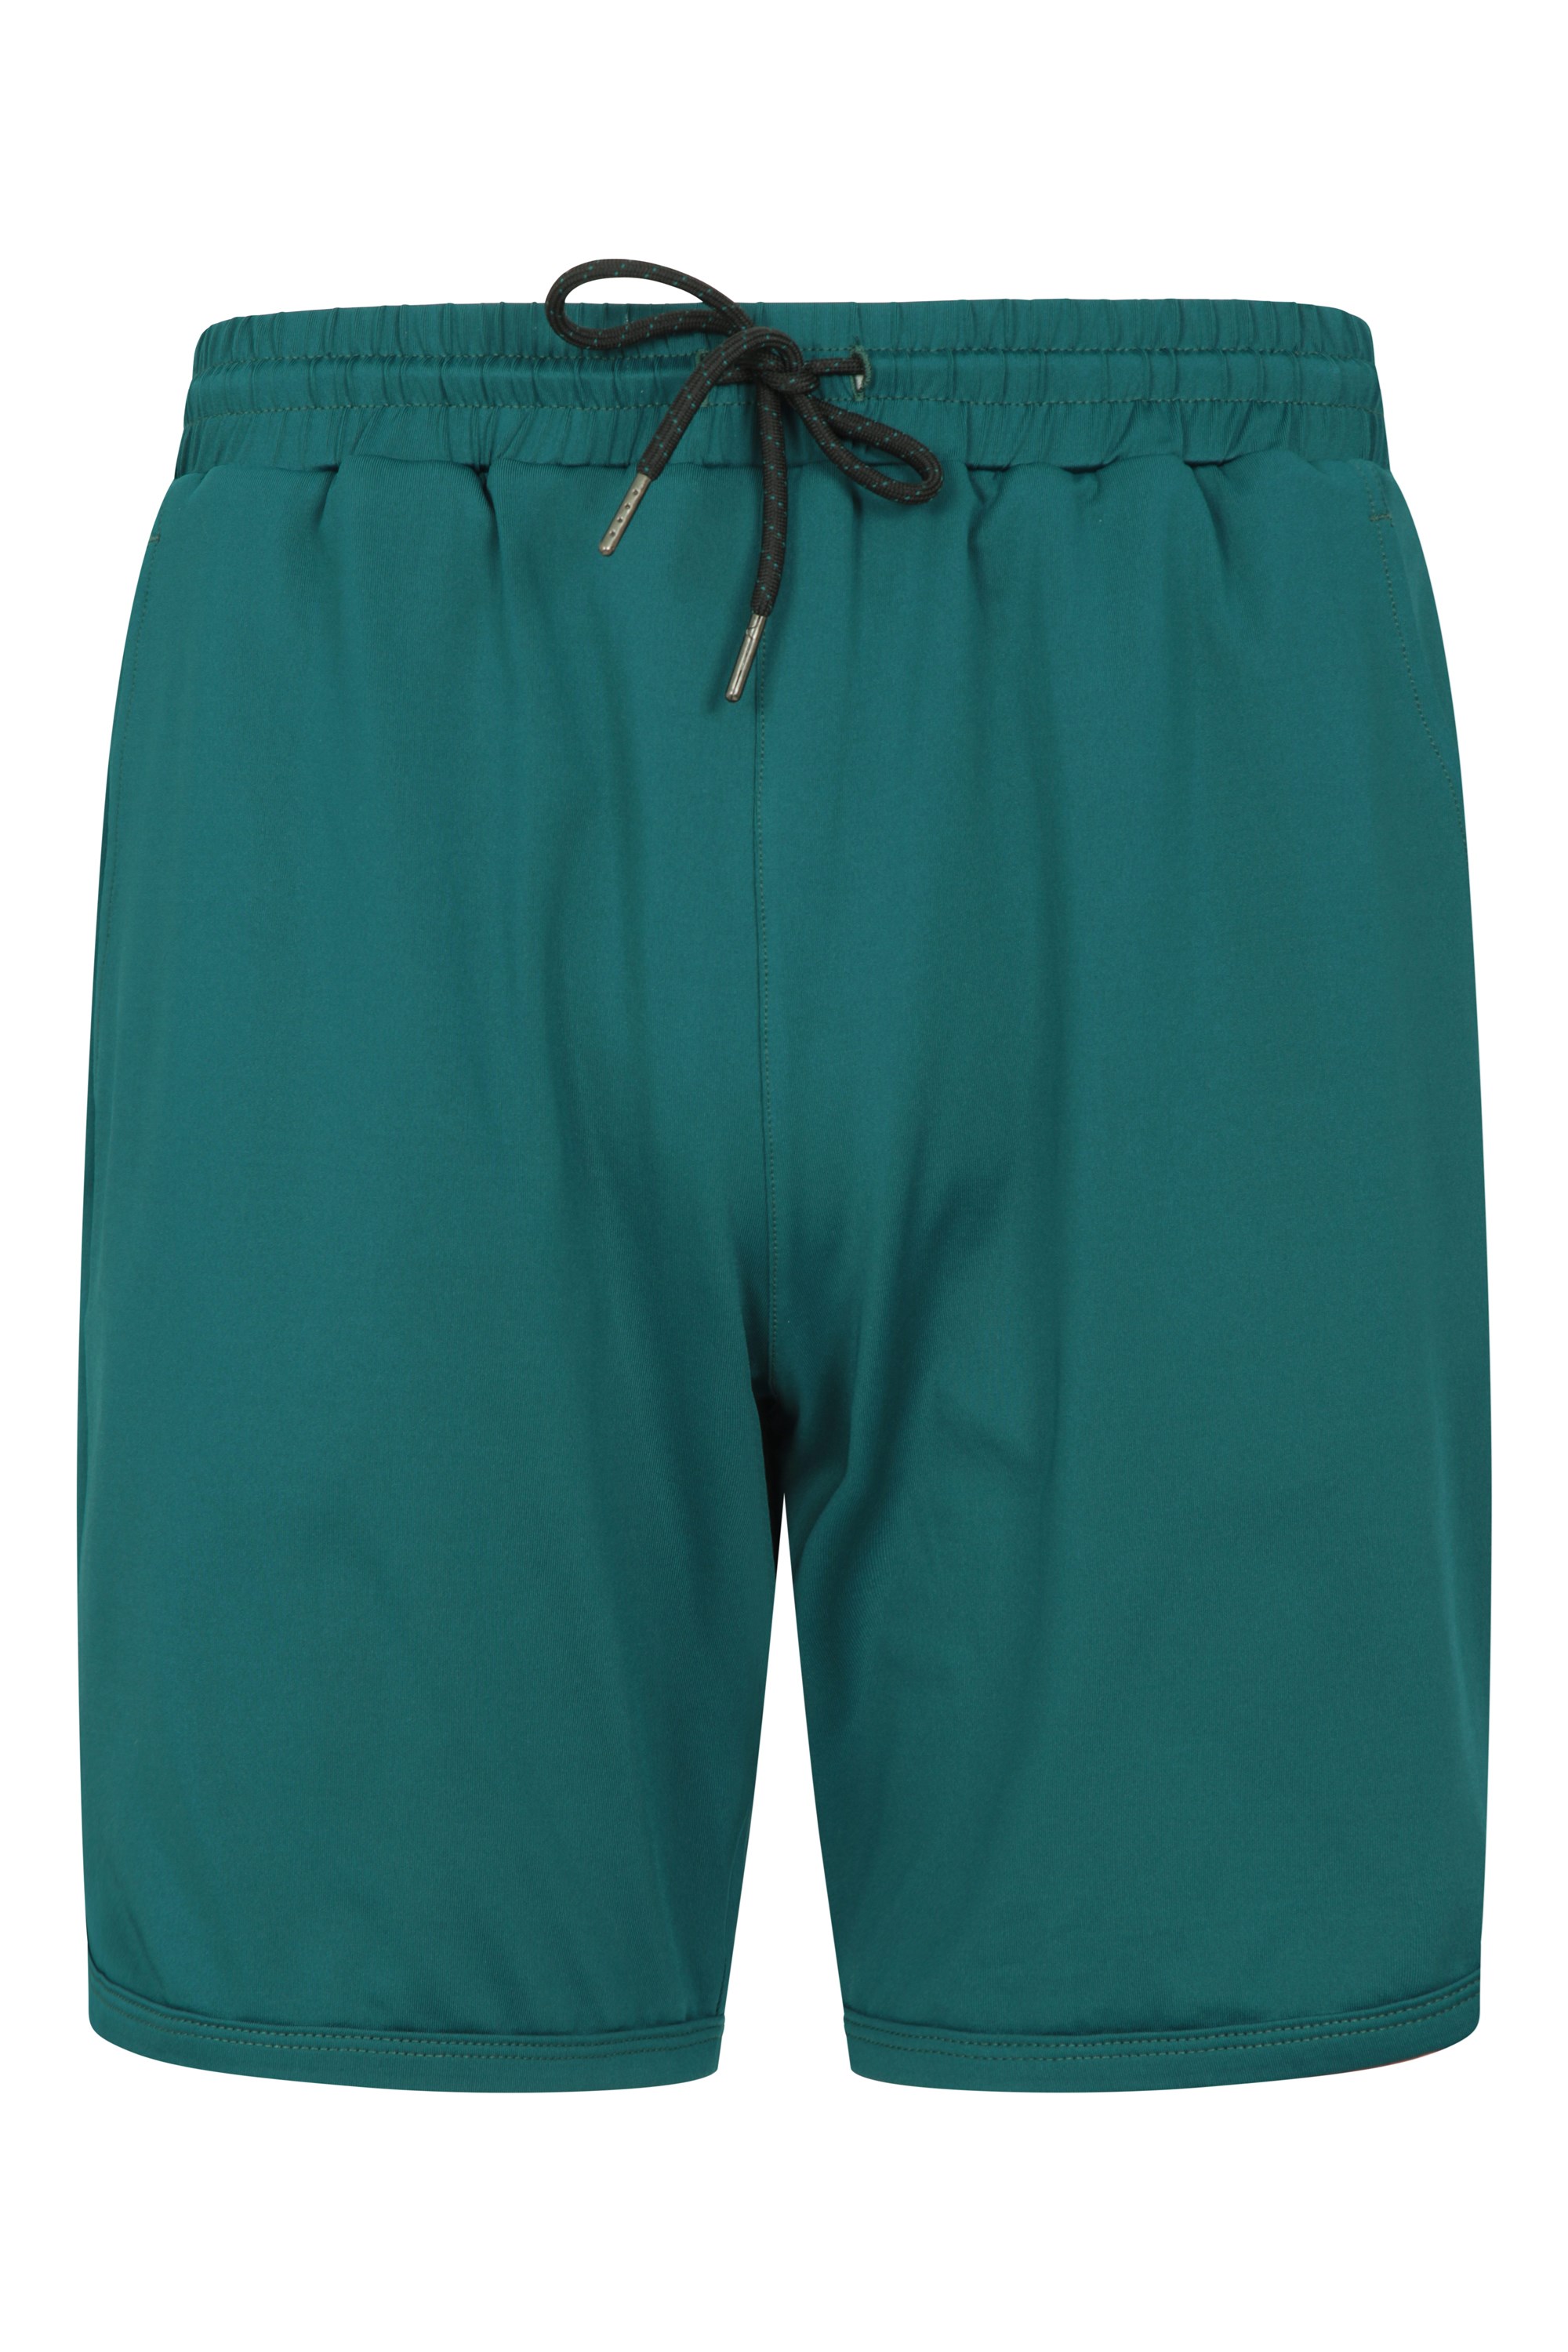 Core Mens Recycled Running Shorts - Teal